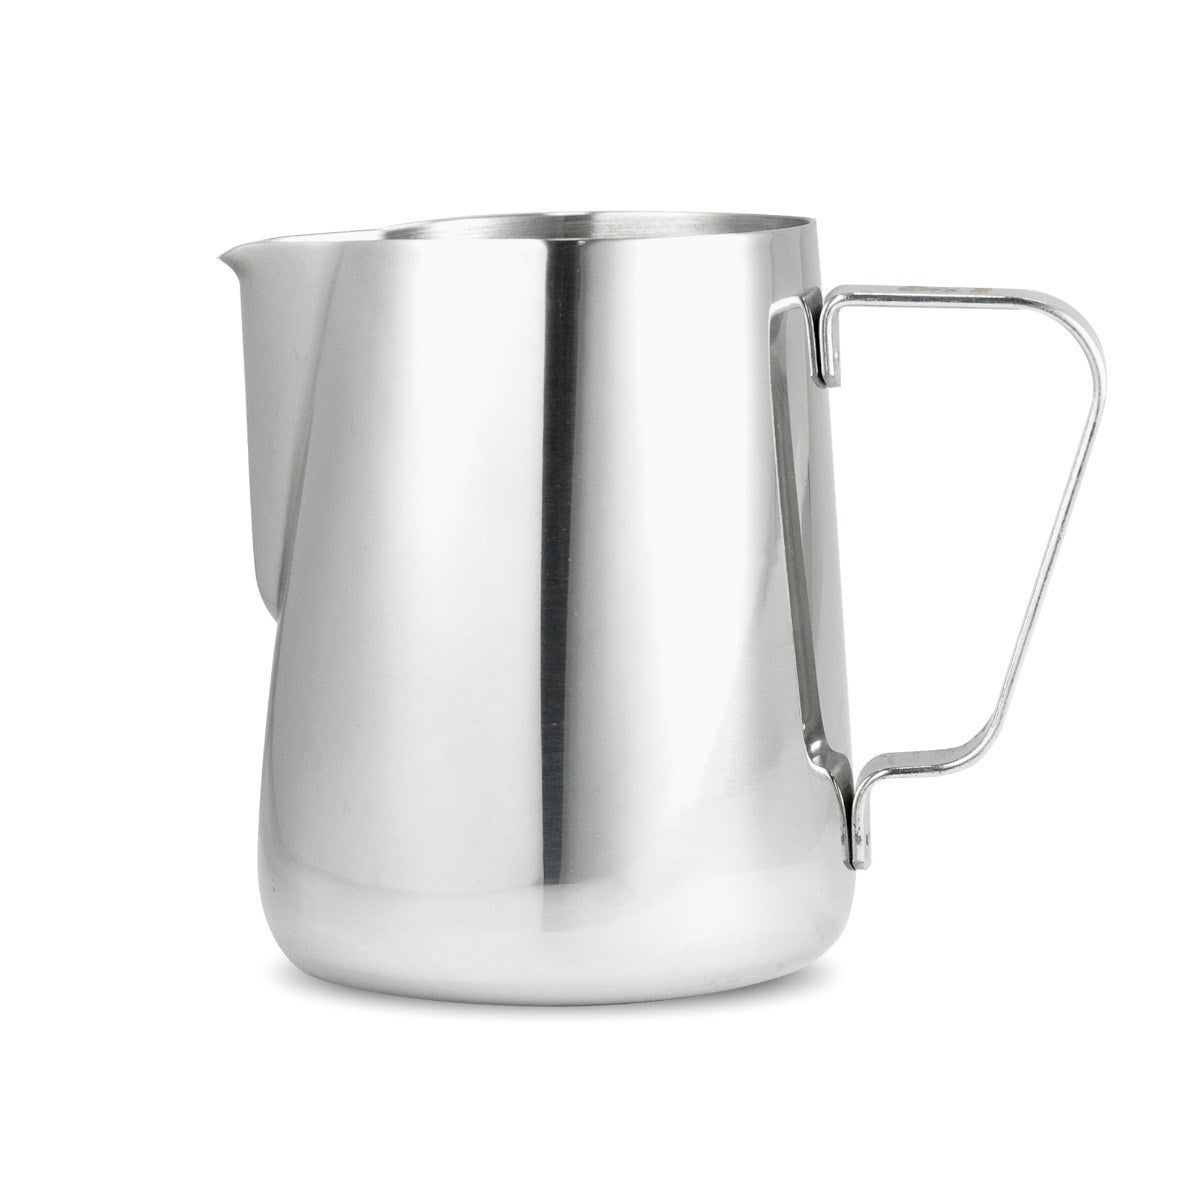 18/8 1.3mm stainless steel frothing pitcher